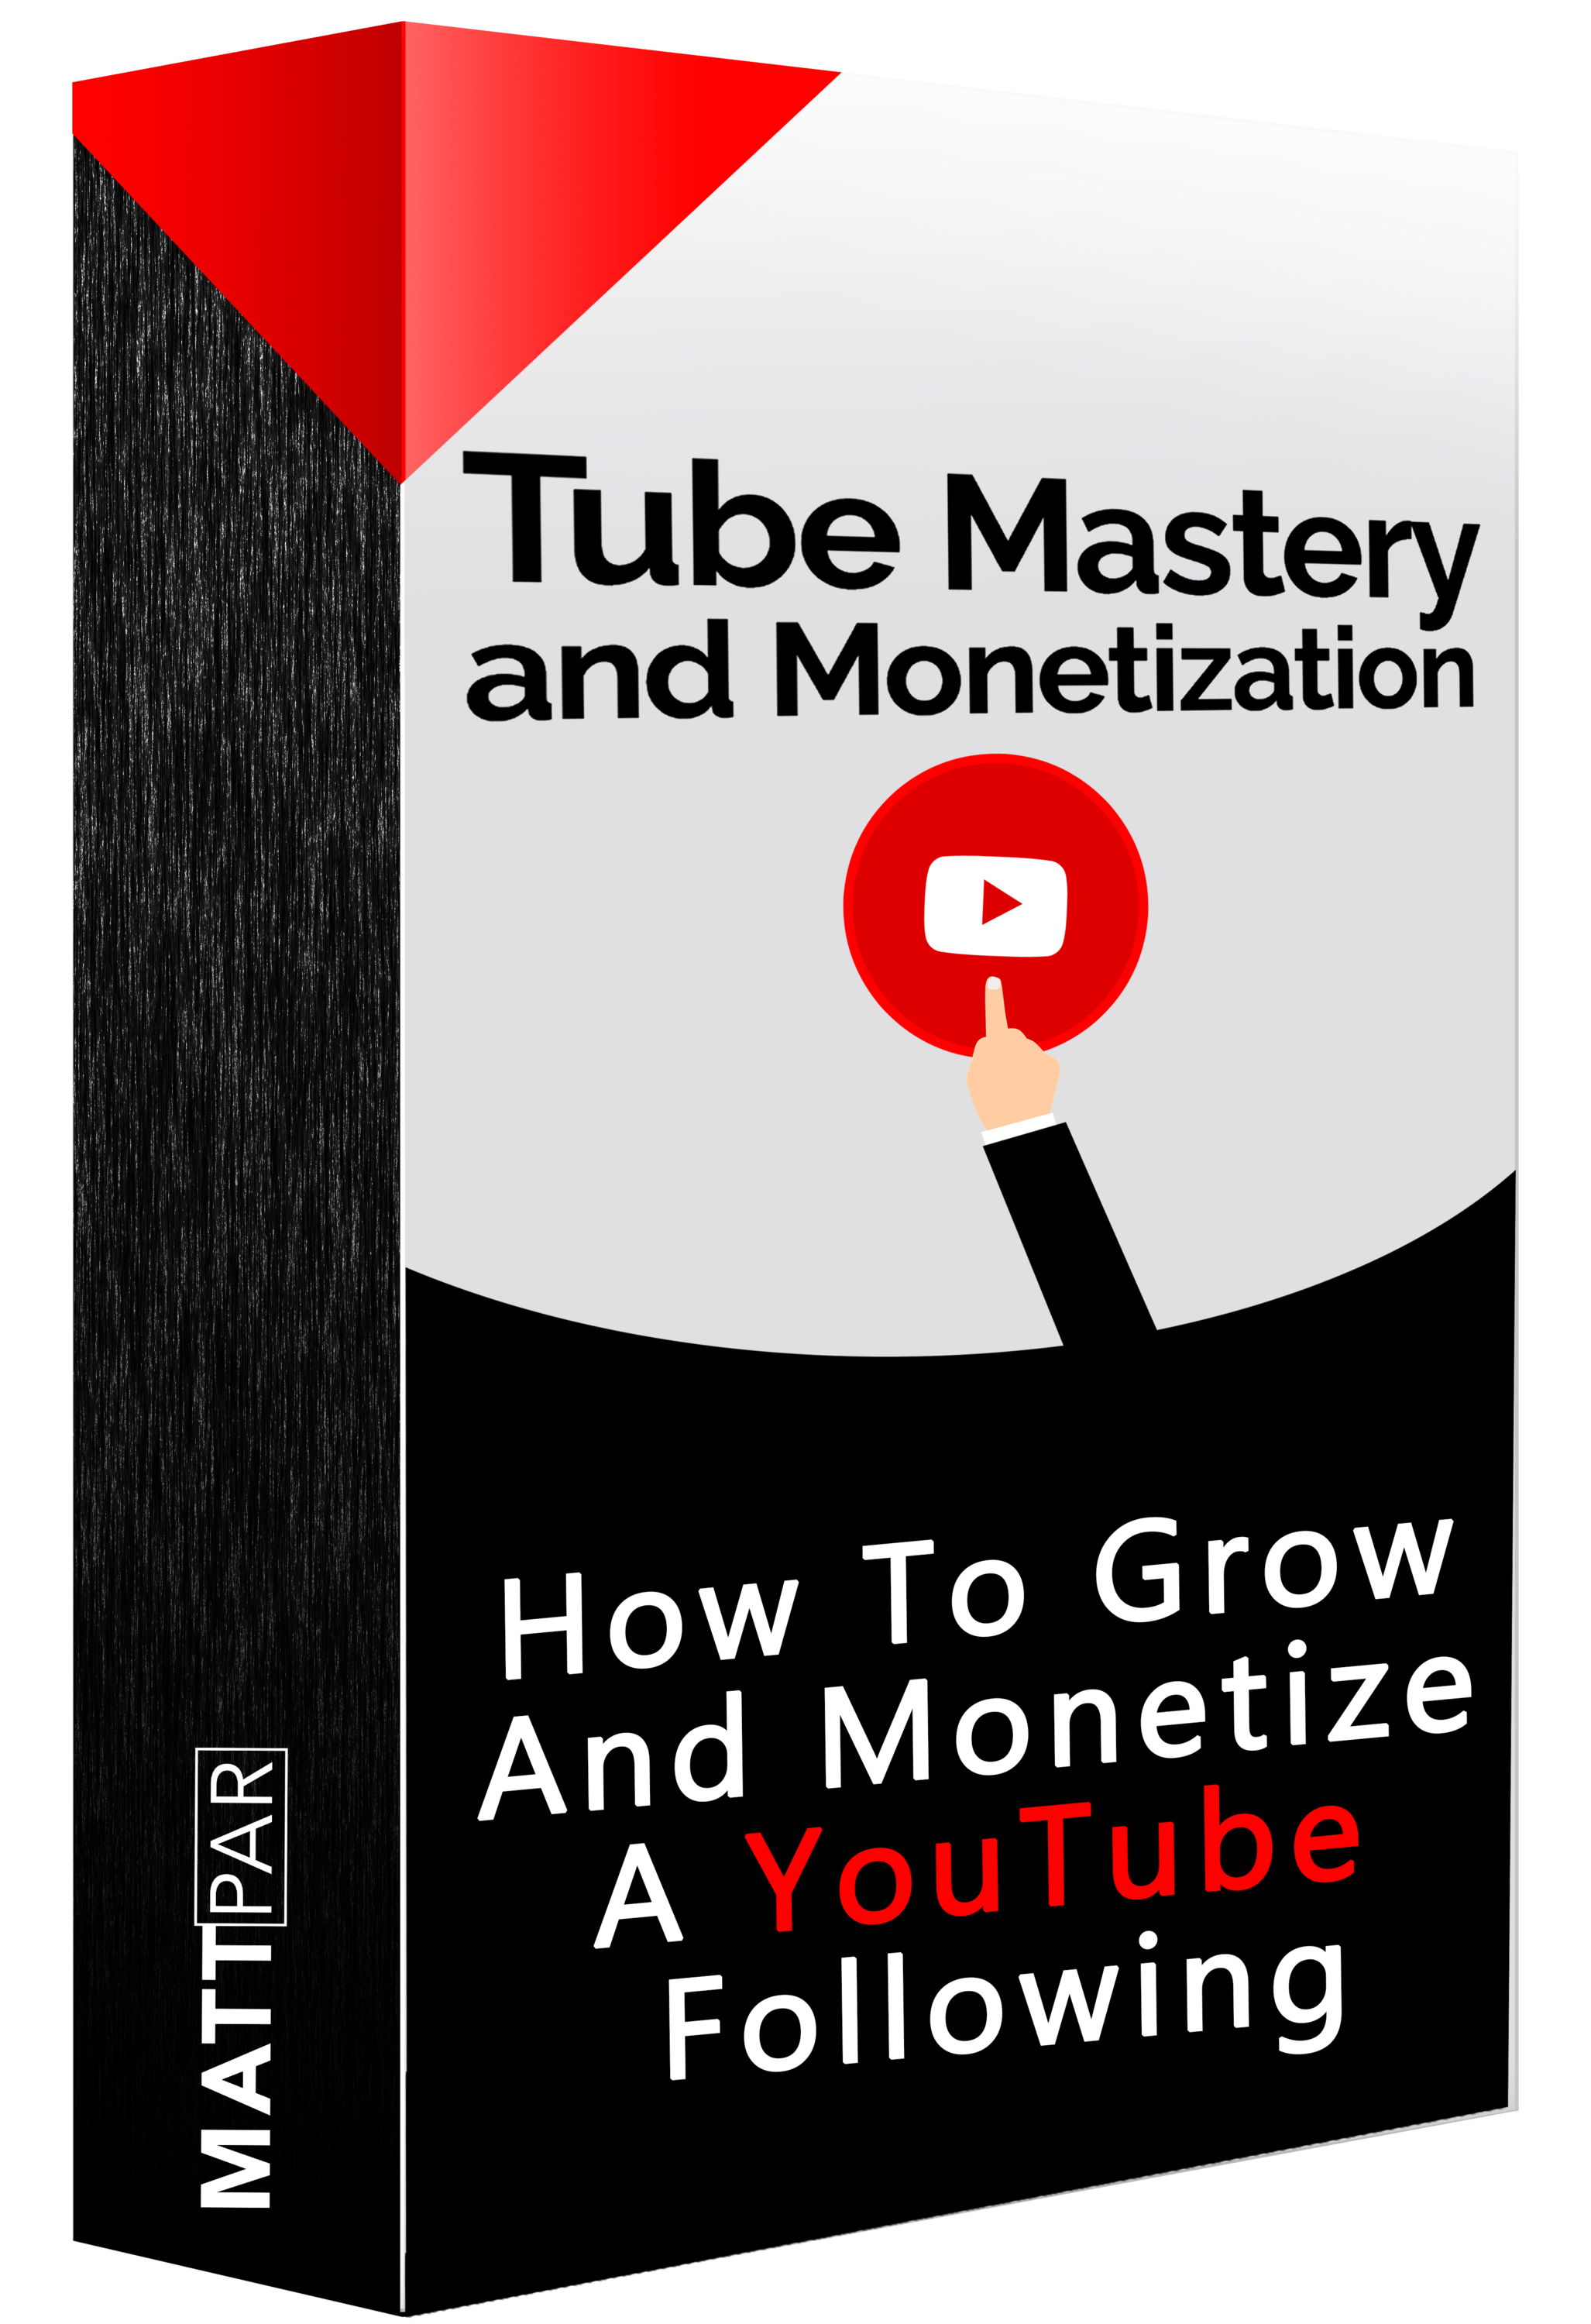 BE Tube Mastery
Ee and Monetization

Q

 

ow To Grow
ie YoY acaba

JA :
Following

MATTPAR